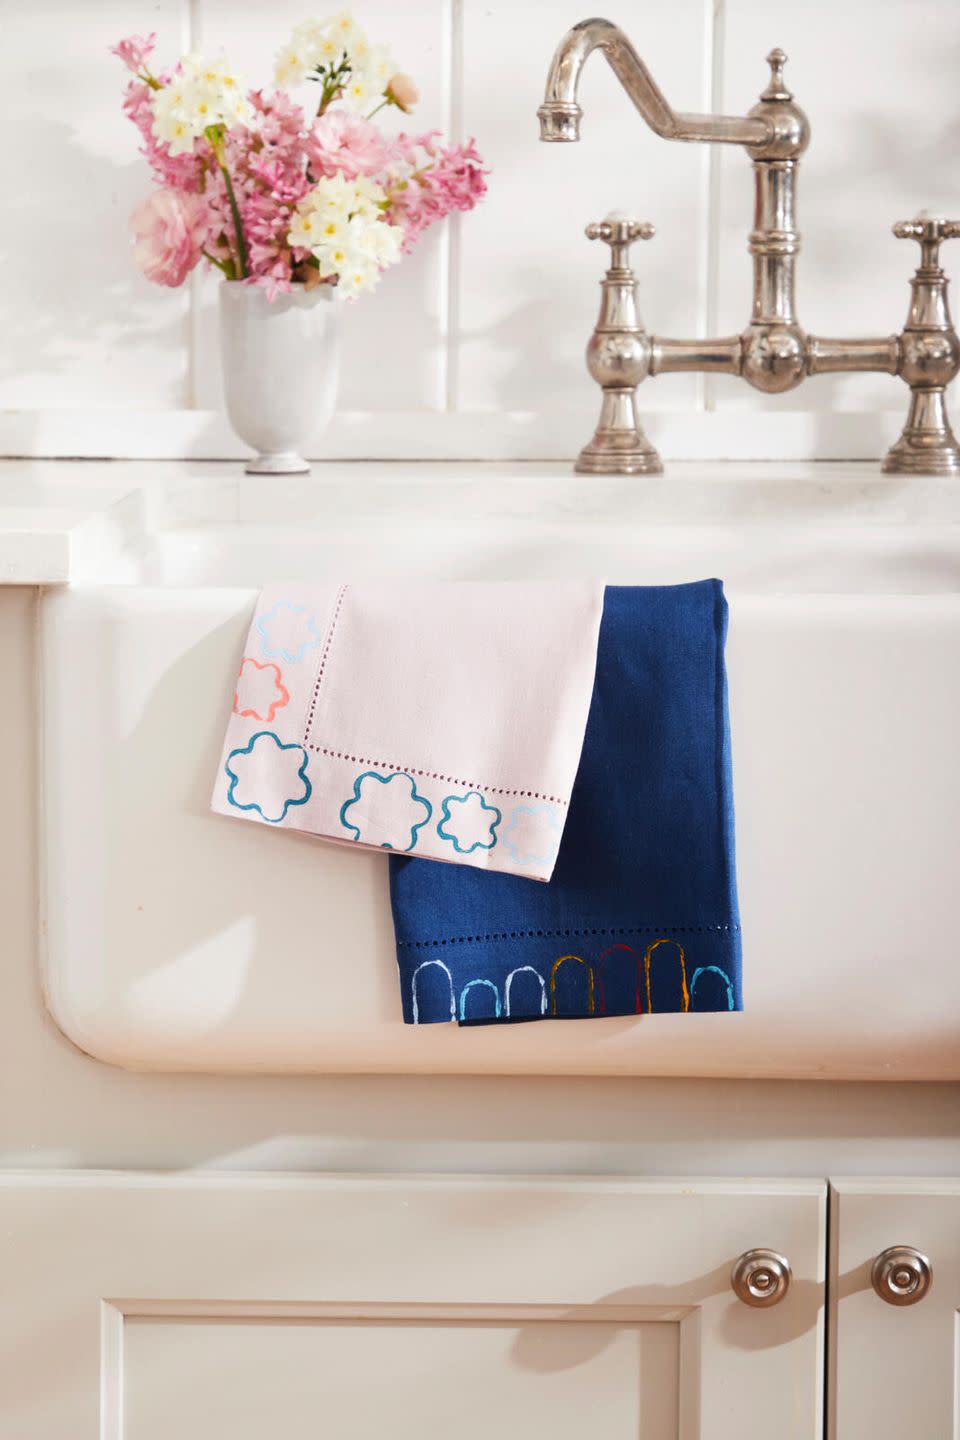 printed dishtowels hung over a farm sink with a bouquet of pink flowers on the counter